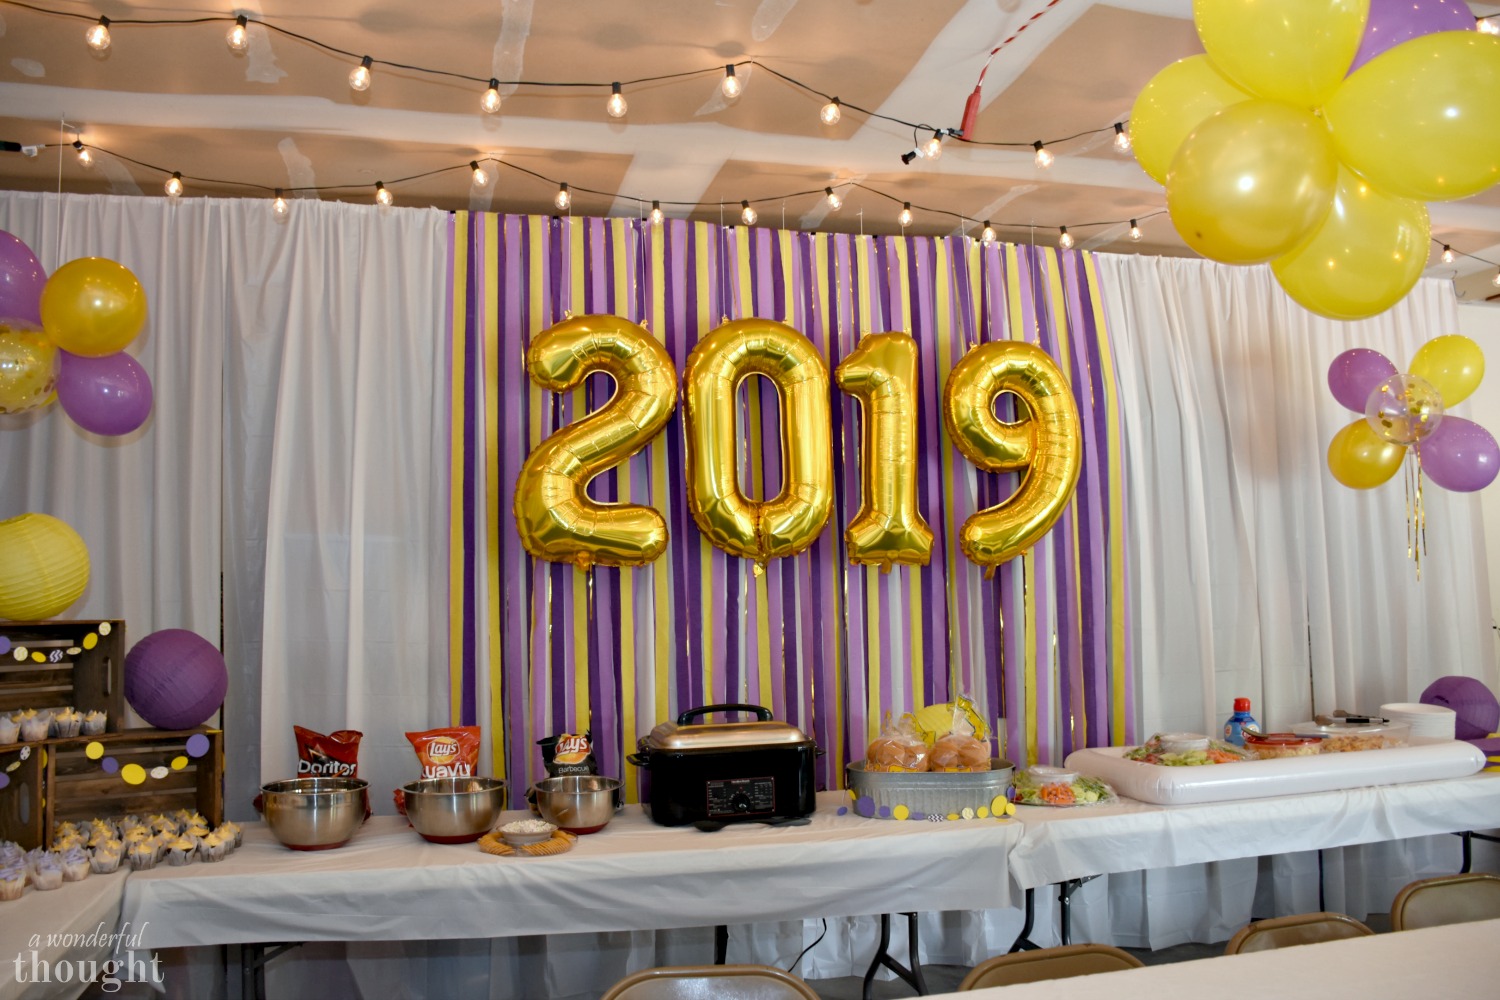 Graduation Party Ideas | Garage Party #graduationparty #graduationdecor #graduationfood #partyideas #partydecor #awonderfulthought